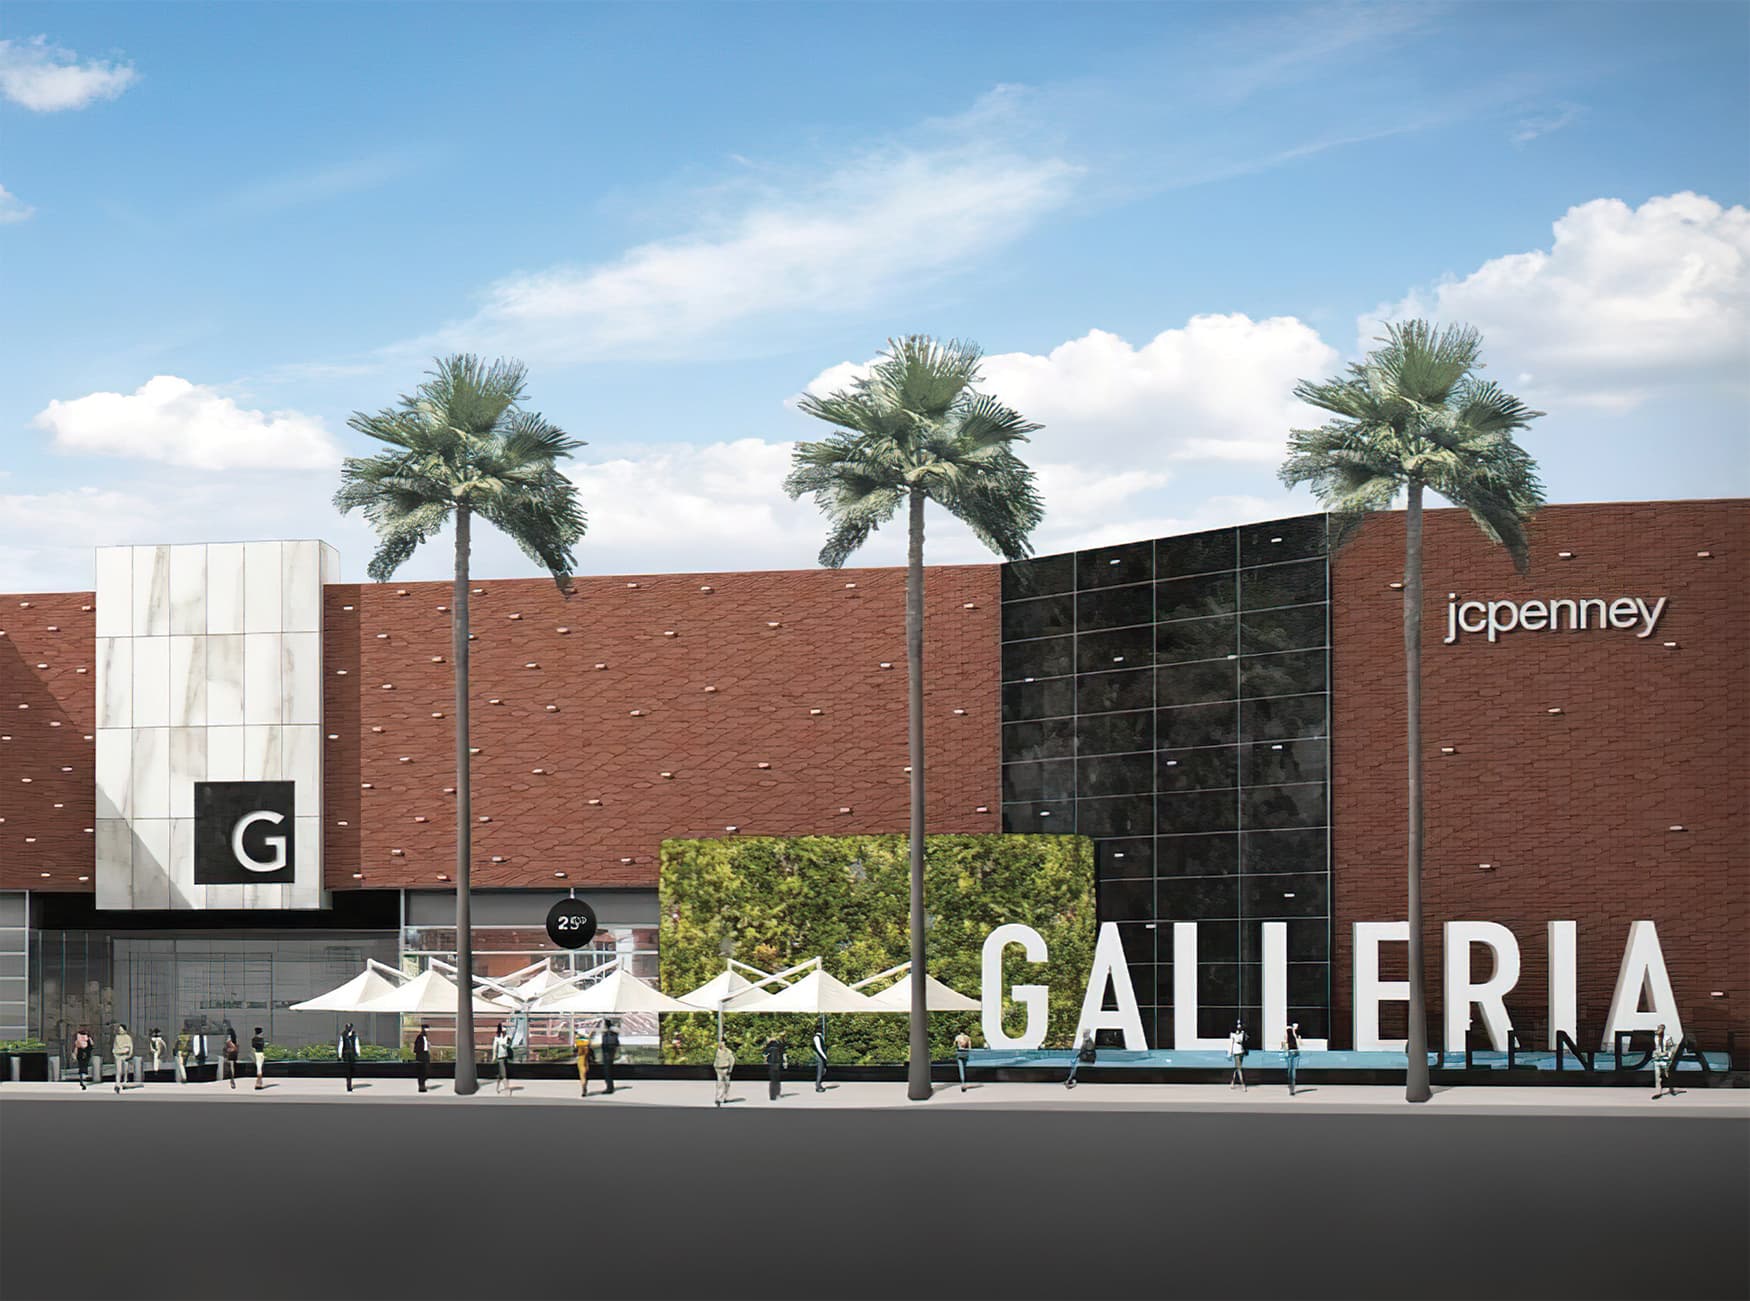 Glendale Galleria. A retail destination in Glendale, California. Project Facade Identity Signage and Sculptural Identity.